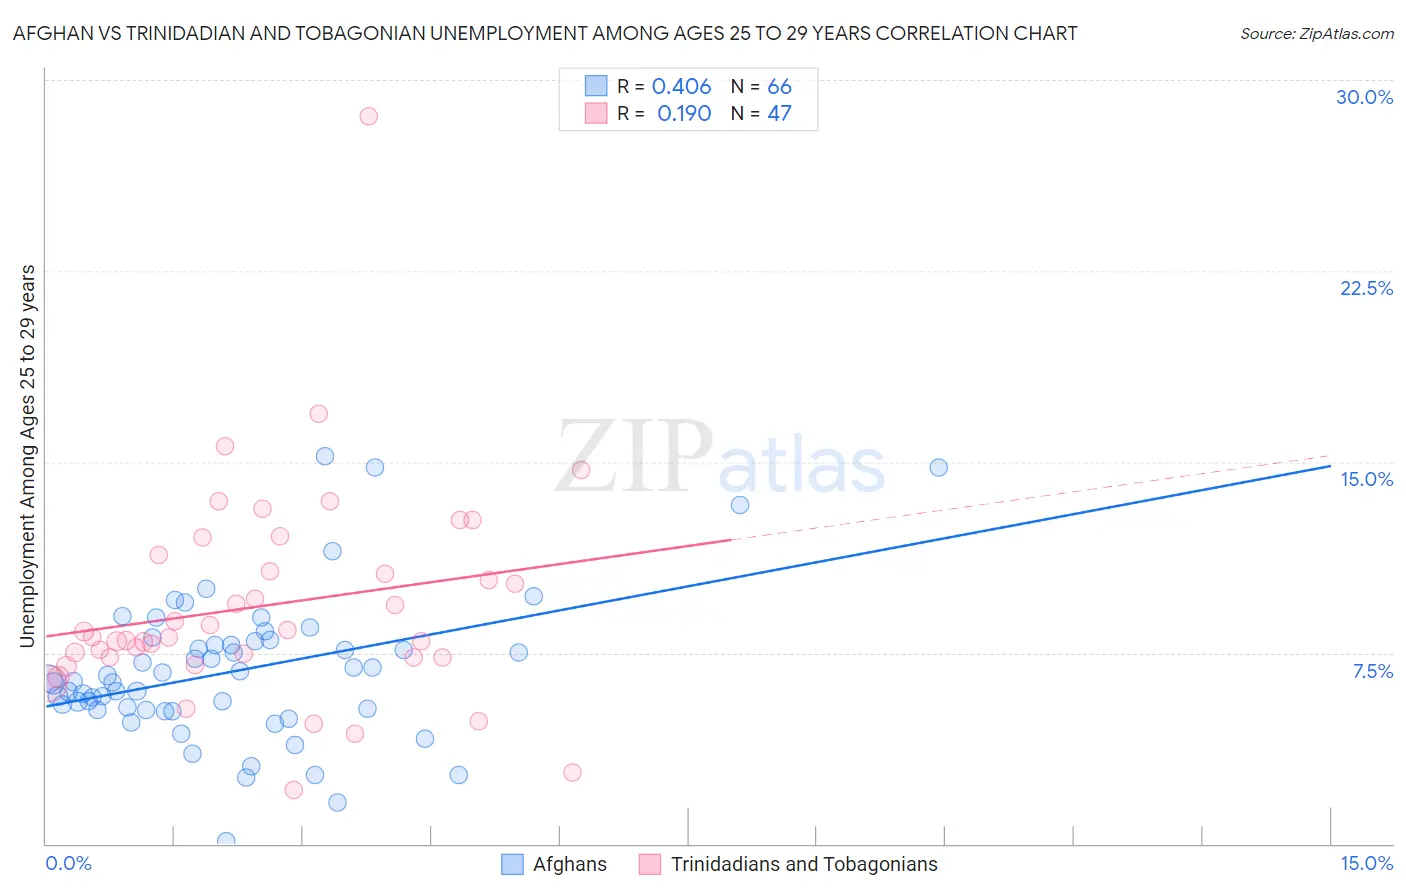 Afghan vs Trinidadian and Tobagonian Unemployment Among Ages 25 to 29 years